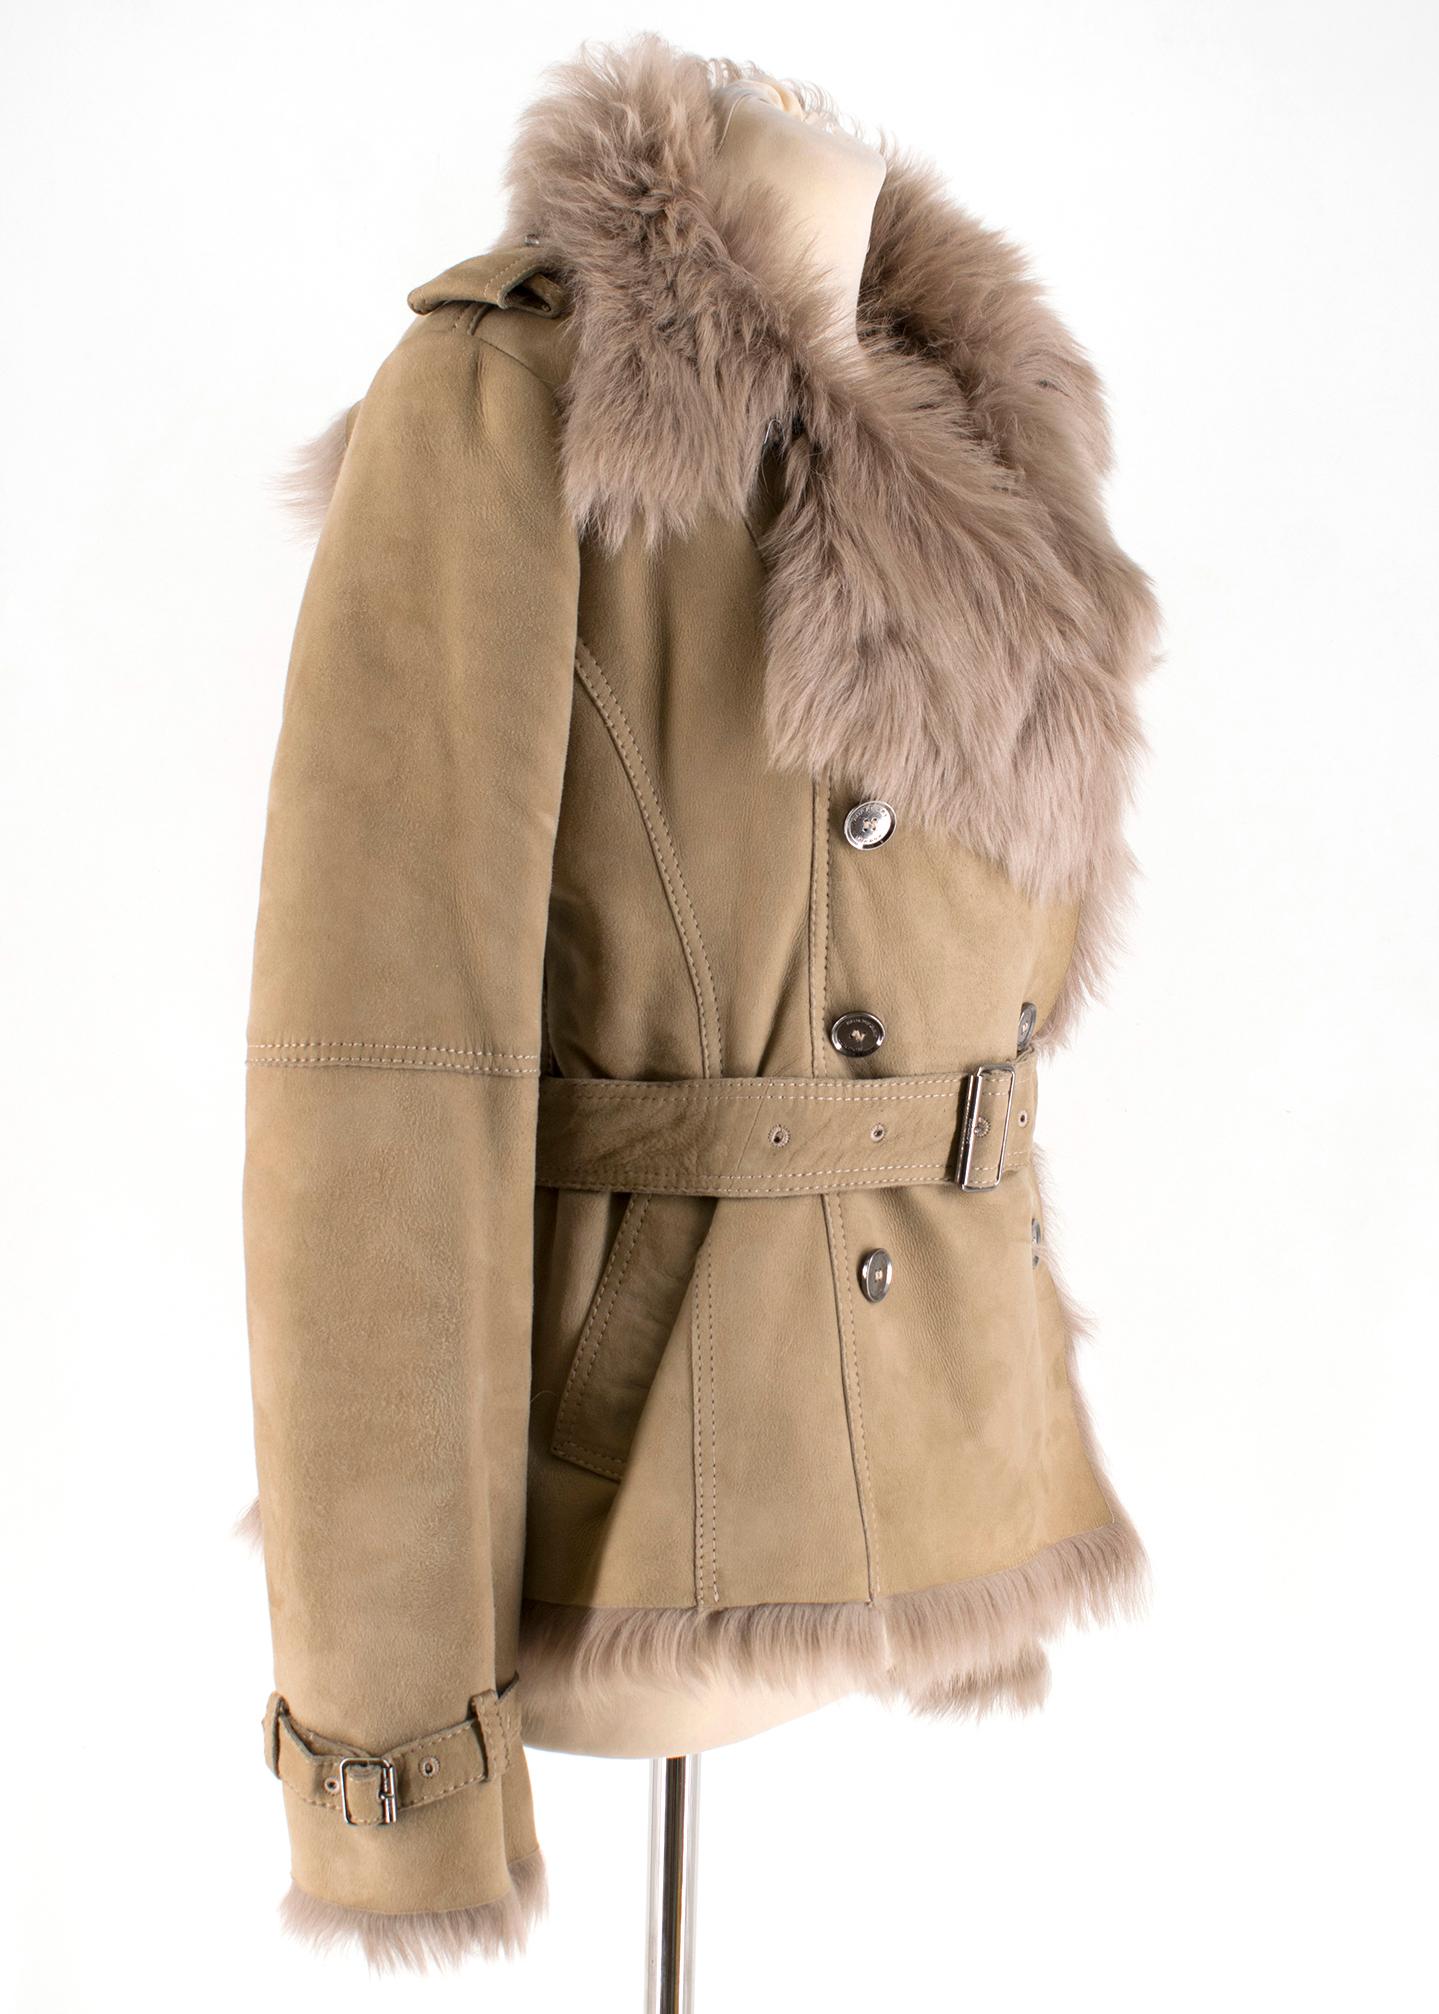 Burberry Camel Lamb Shearling Belted Jacket

Smooth brown suede jacket,
Soft shearling lining,
Long sleeves,
Double breasted jacket,
Adjustable belt tie with buckle fastening,
Buckle up cuffs,
Two front slant pockets,
Single back vent,
Features gun